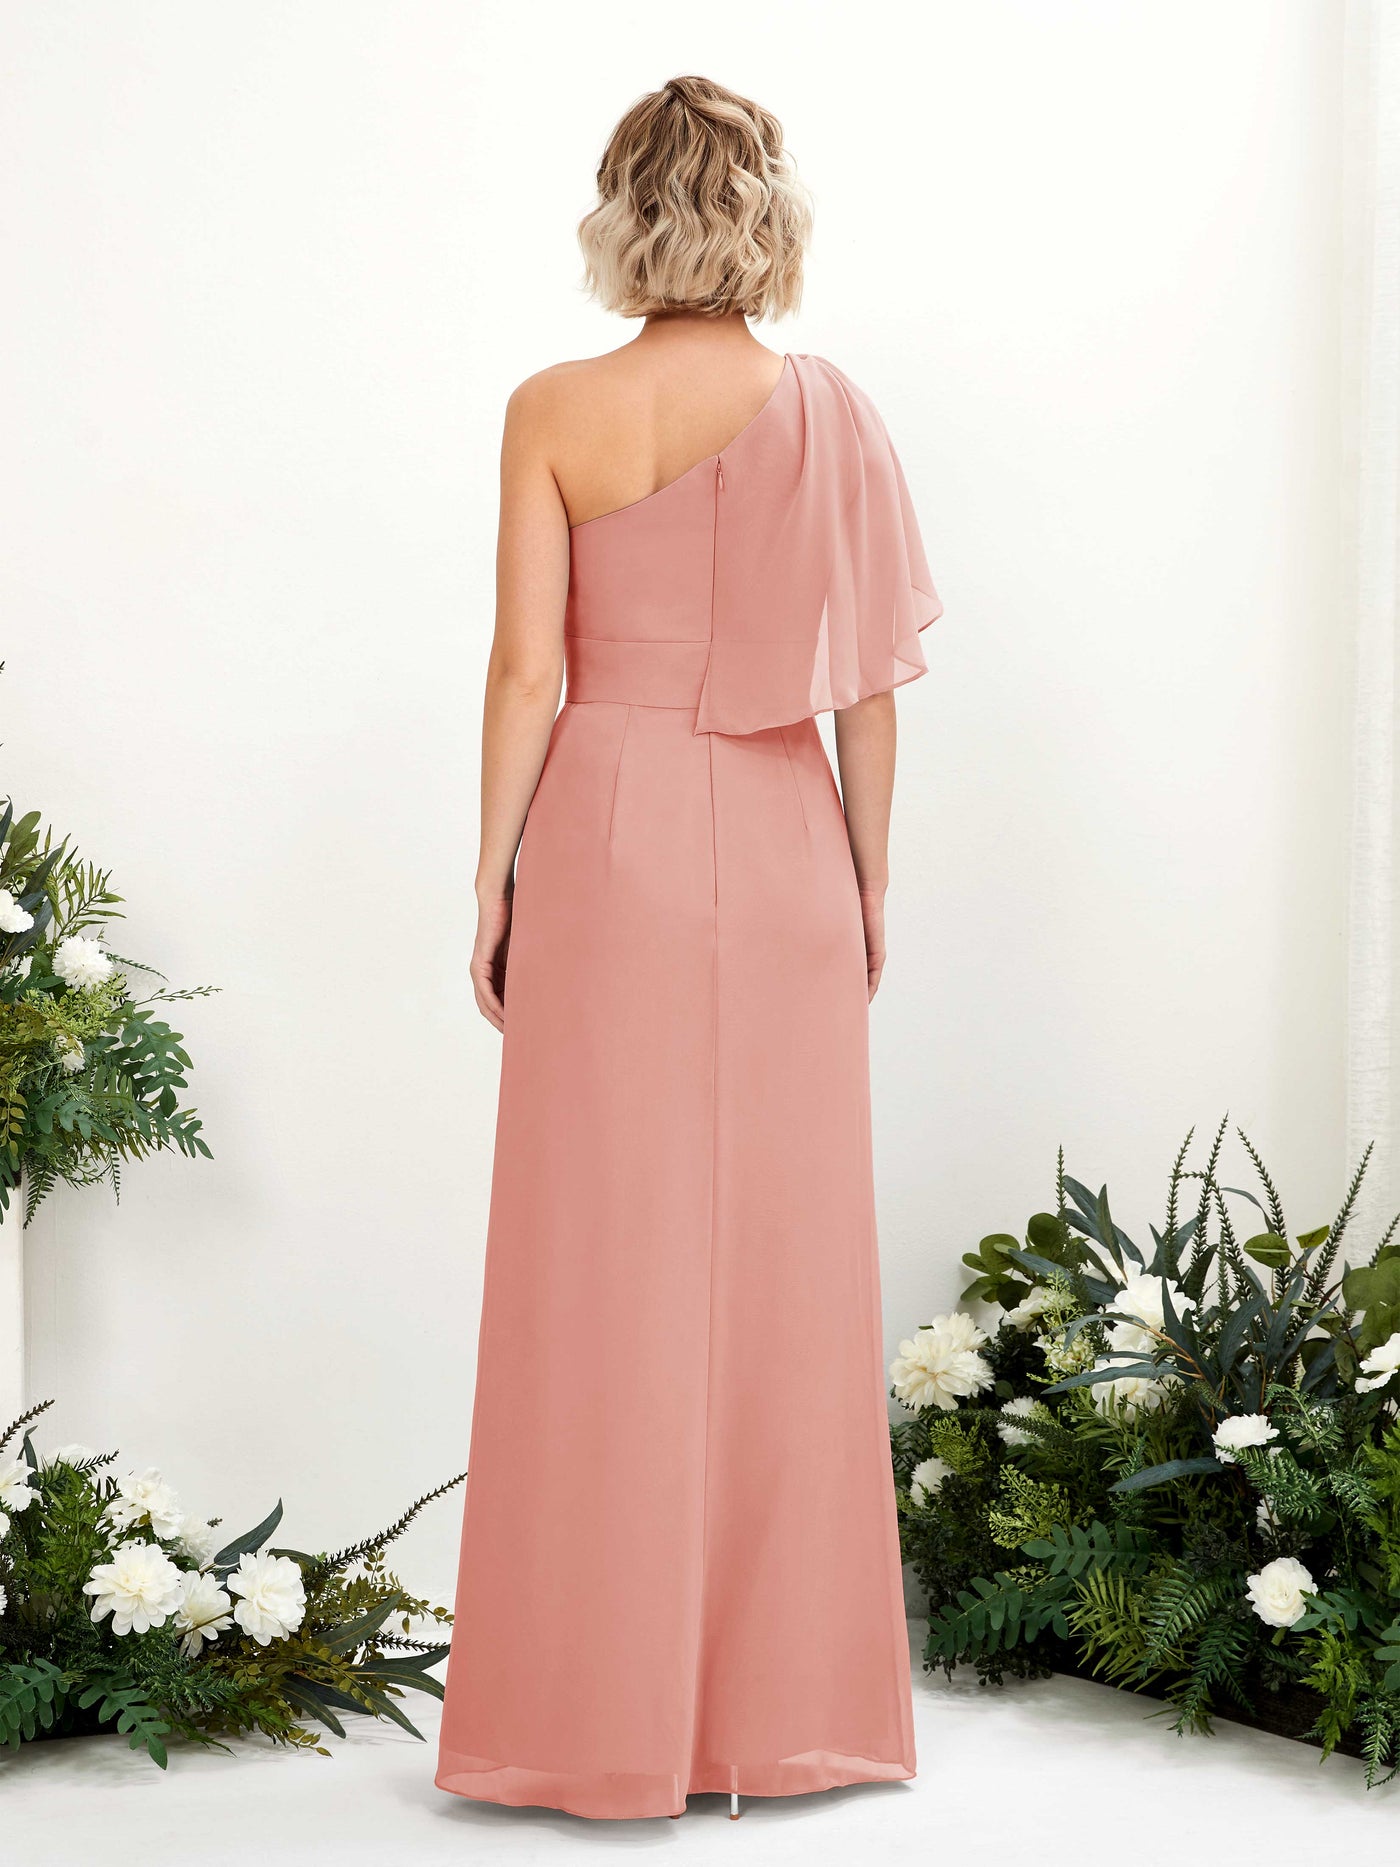 Champagne Rose Bridesmaid Dresses Bridesmaid Dress Ball Gown Chiffon Full Length Short Sleeves Wedding Party Dress (81223706)#color_champagne-rose